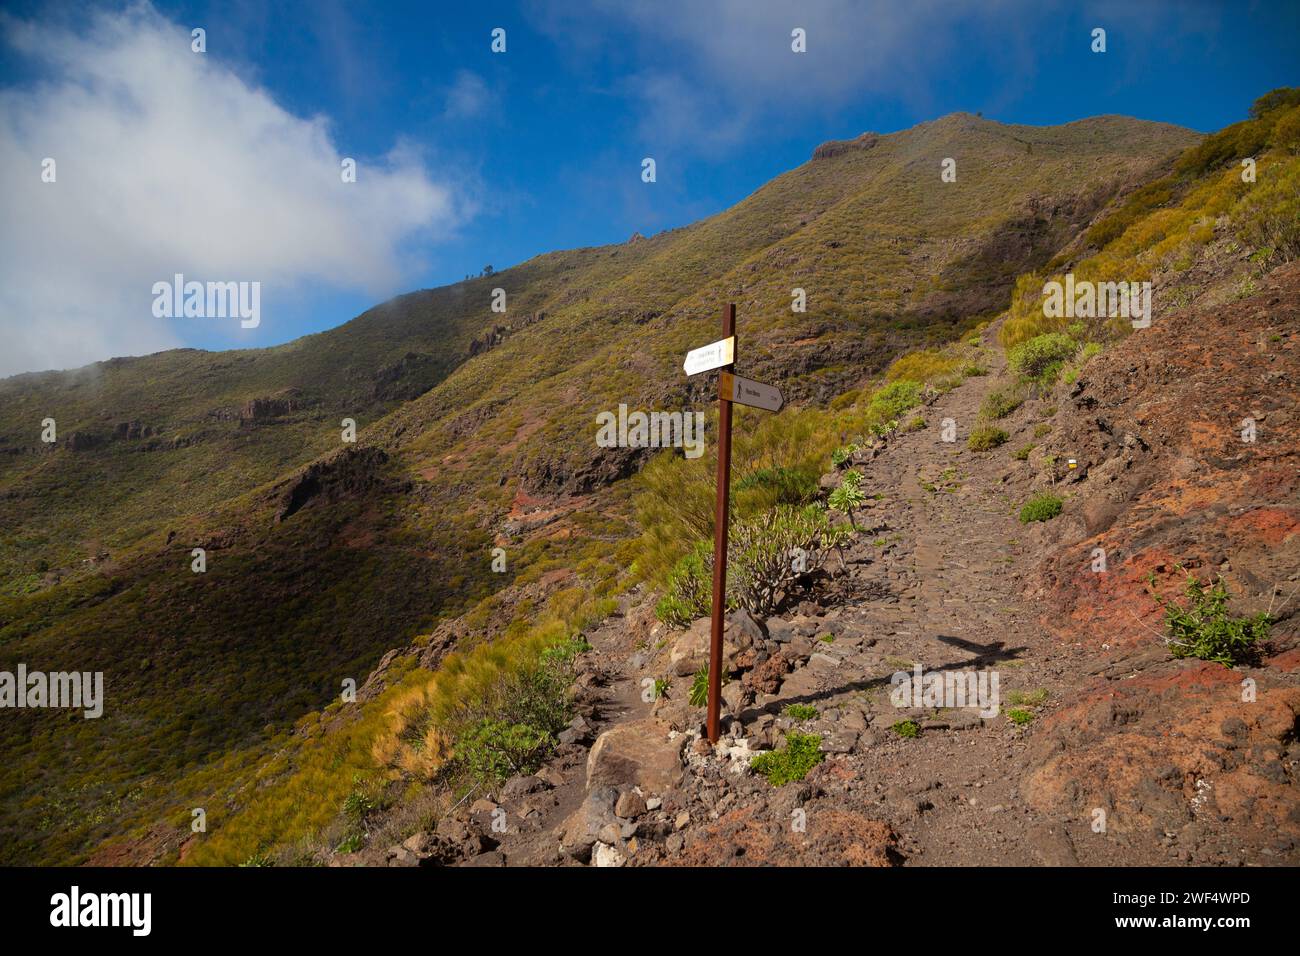 A footpath TF 65 heading into the hills above the village of El Molledo, Tenerife, Spain Stock Photo